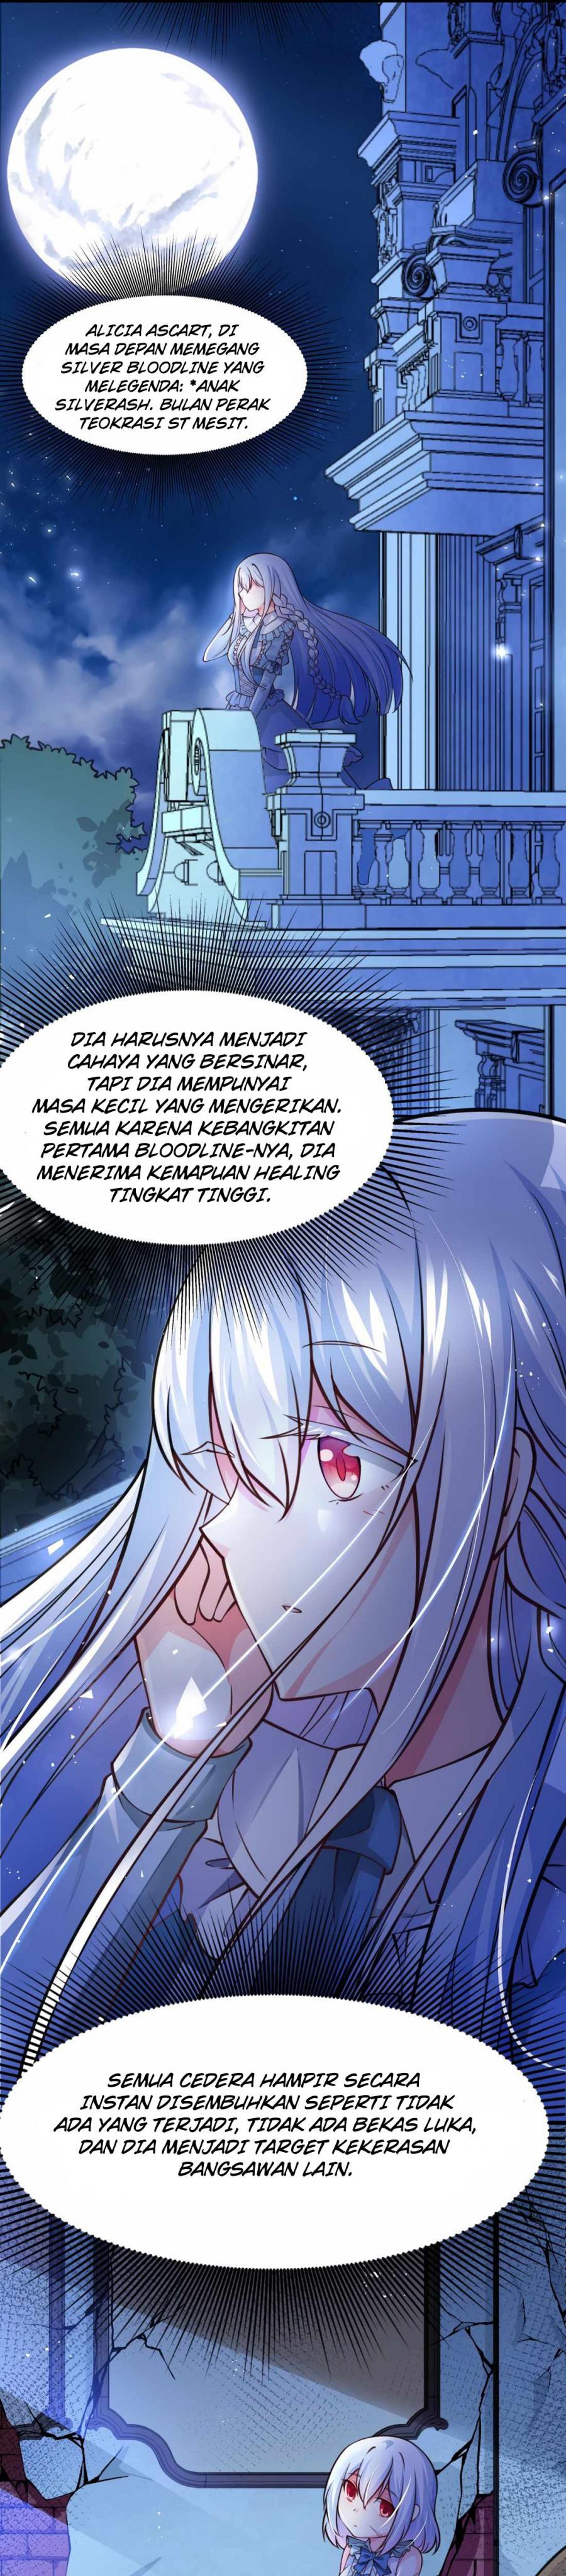 Dilarang COPAS - situs resmi www.mangacanblog.com - Komik little tyrant doesnt want to meet with a bad end 002 - chapter 2 3 Indonesia little tyrant doesnt want to meet with a bad end 002 - chapter 2 Terbaru 8|Baca Manga Komik Indonesia|Mangacan